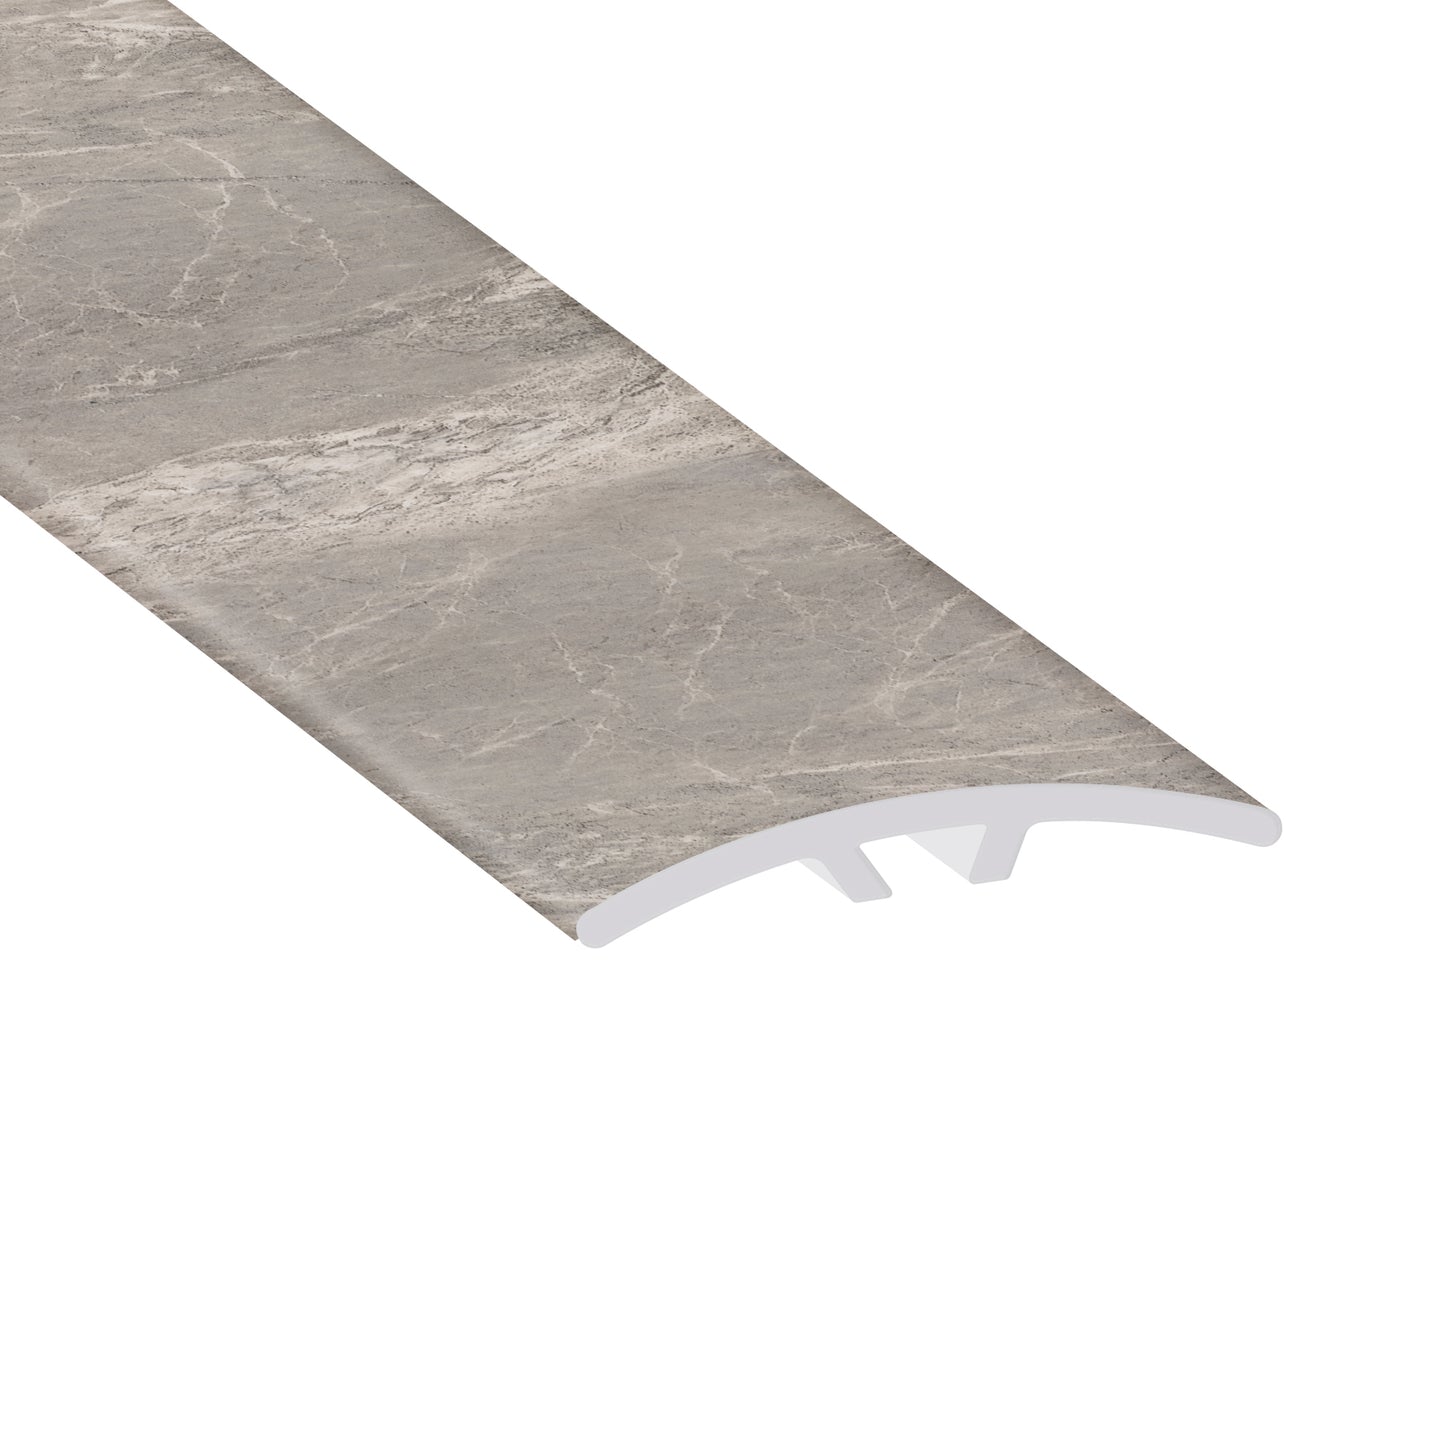 Piazza Travertine 0.23 in. Thich x 1.59 in. Width x 94 in. Length Multi-Purpose Reducer Vinyl Molding